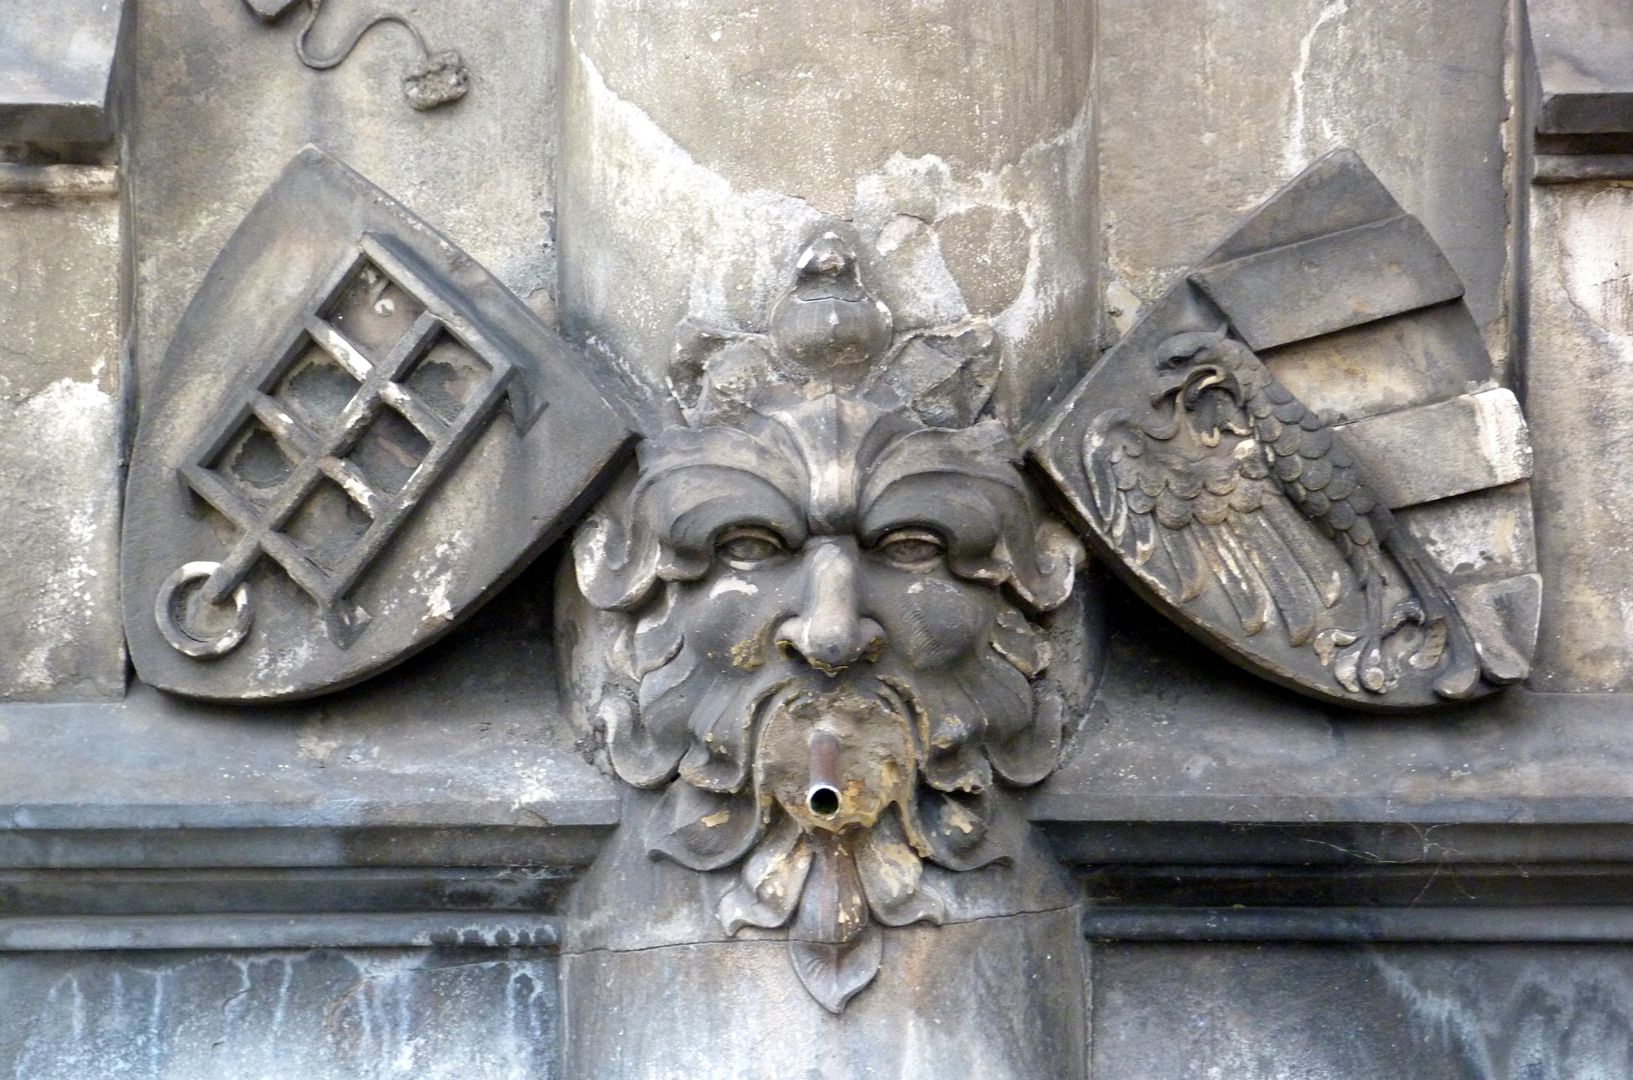 Devil's Fountain Gargoyle with leaf mask in the centre, on the left with the coat of arms of St. Lawrence (depicting the grate on which he was martyred) and on the right the Nuremberg city coat of arms.